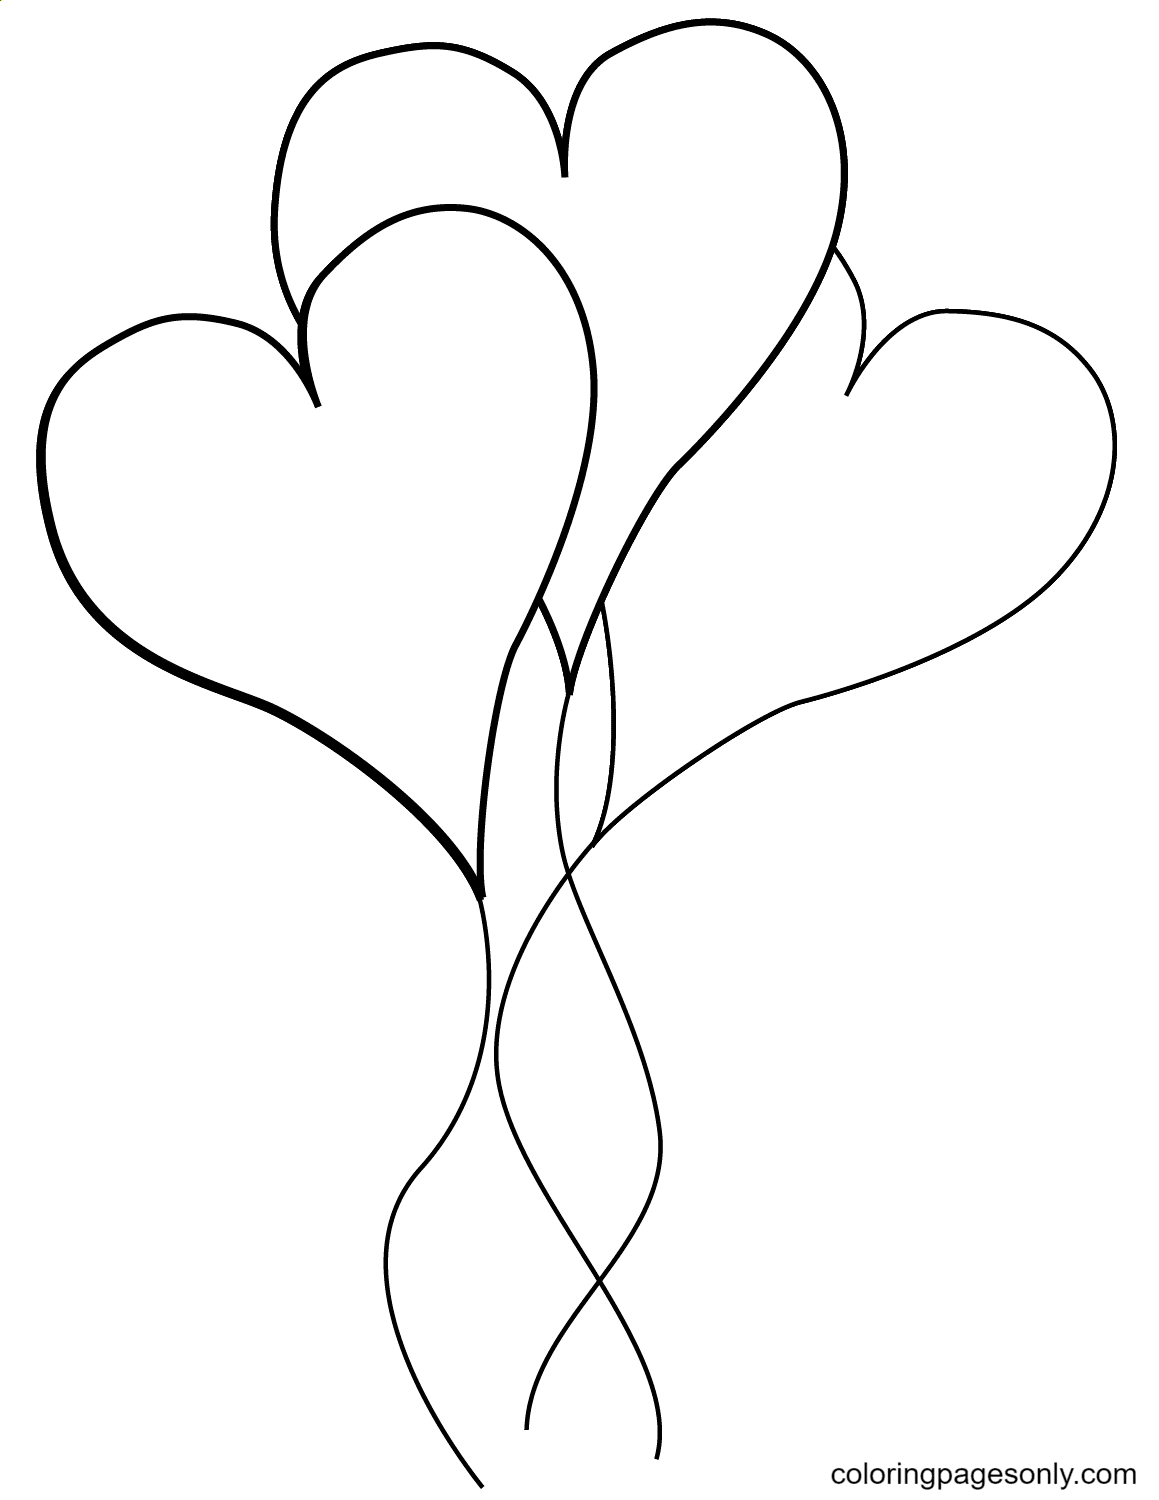 Heart-shaped Balloons Coloring Page